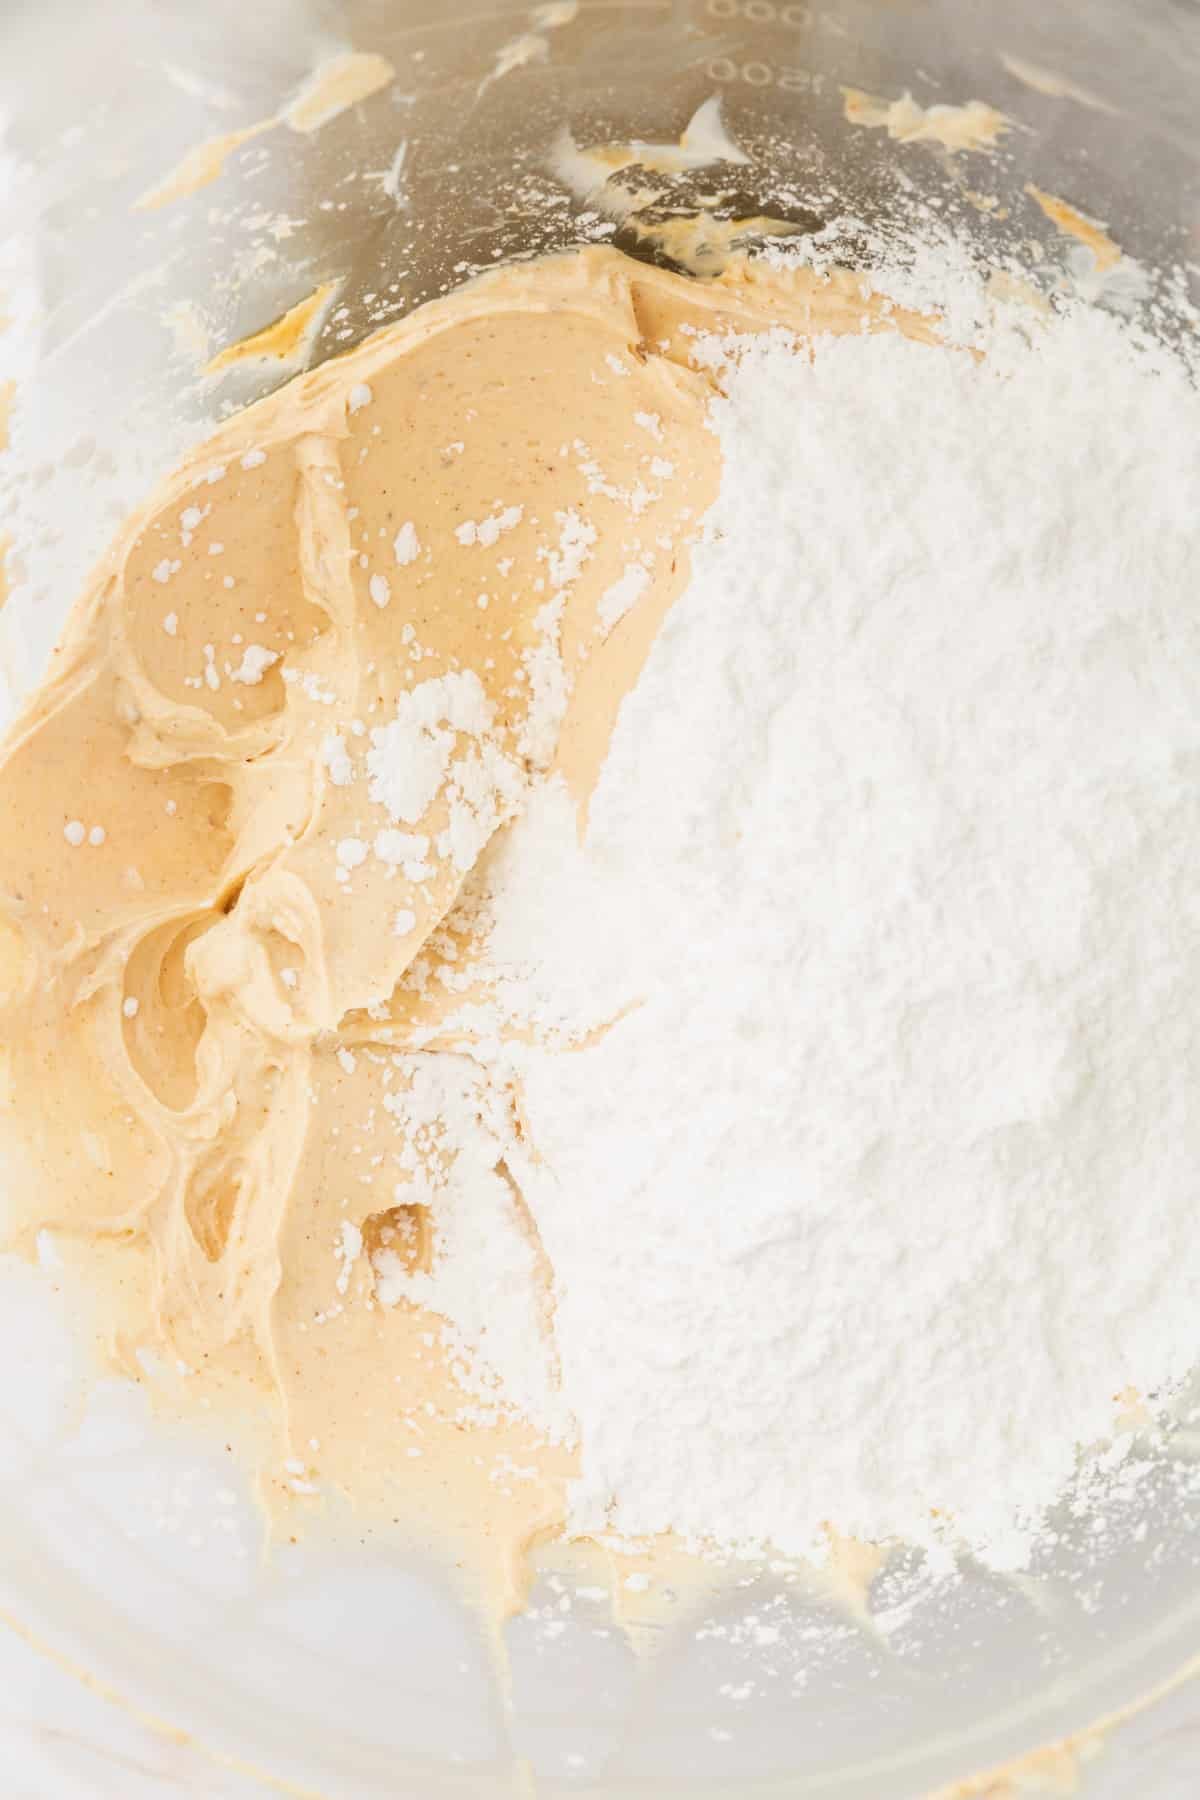 A glass mixing bowl with browned butter and powdered sugar before mixing together.